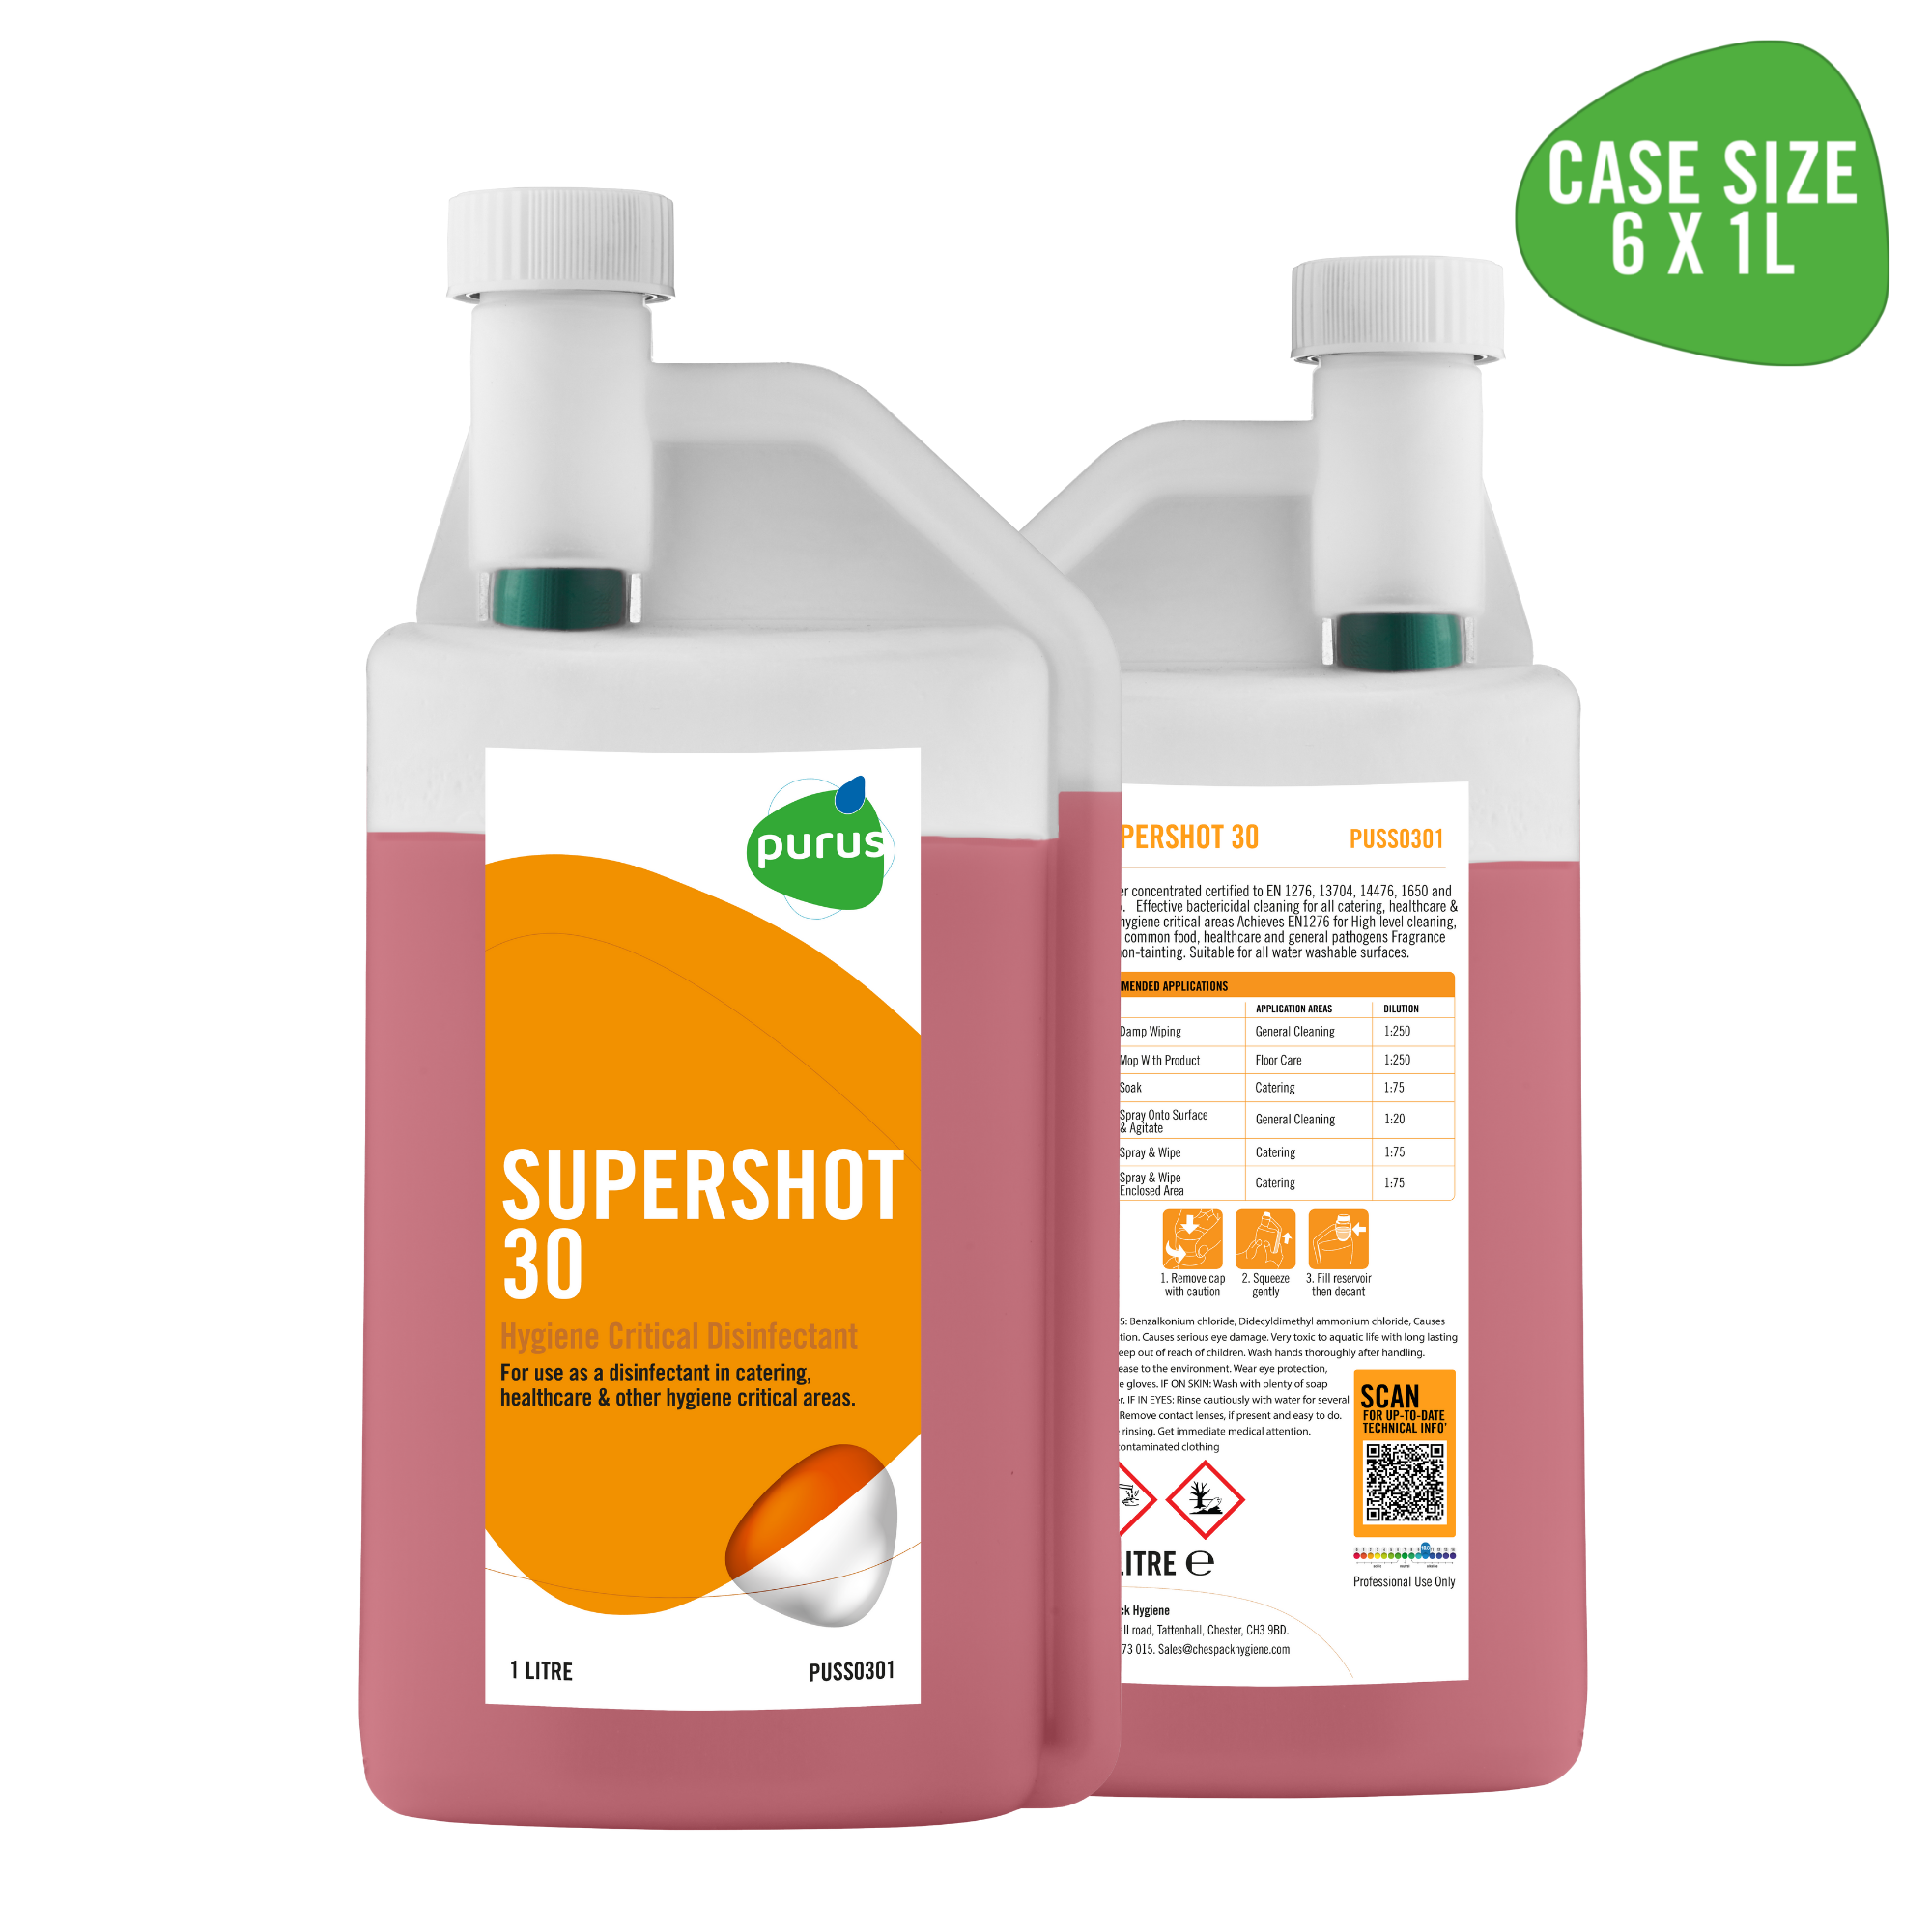 Purus Concentrates | Supershot 30 - Hygiene Critical Bactericidal Cleaner - 6 x 1 Ltr